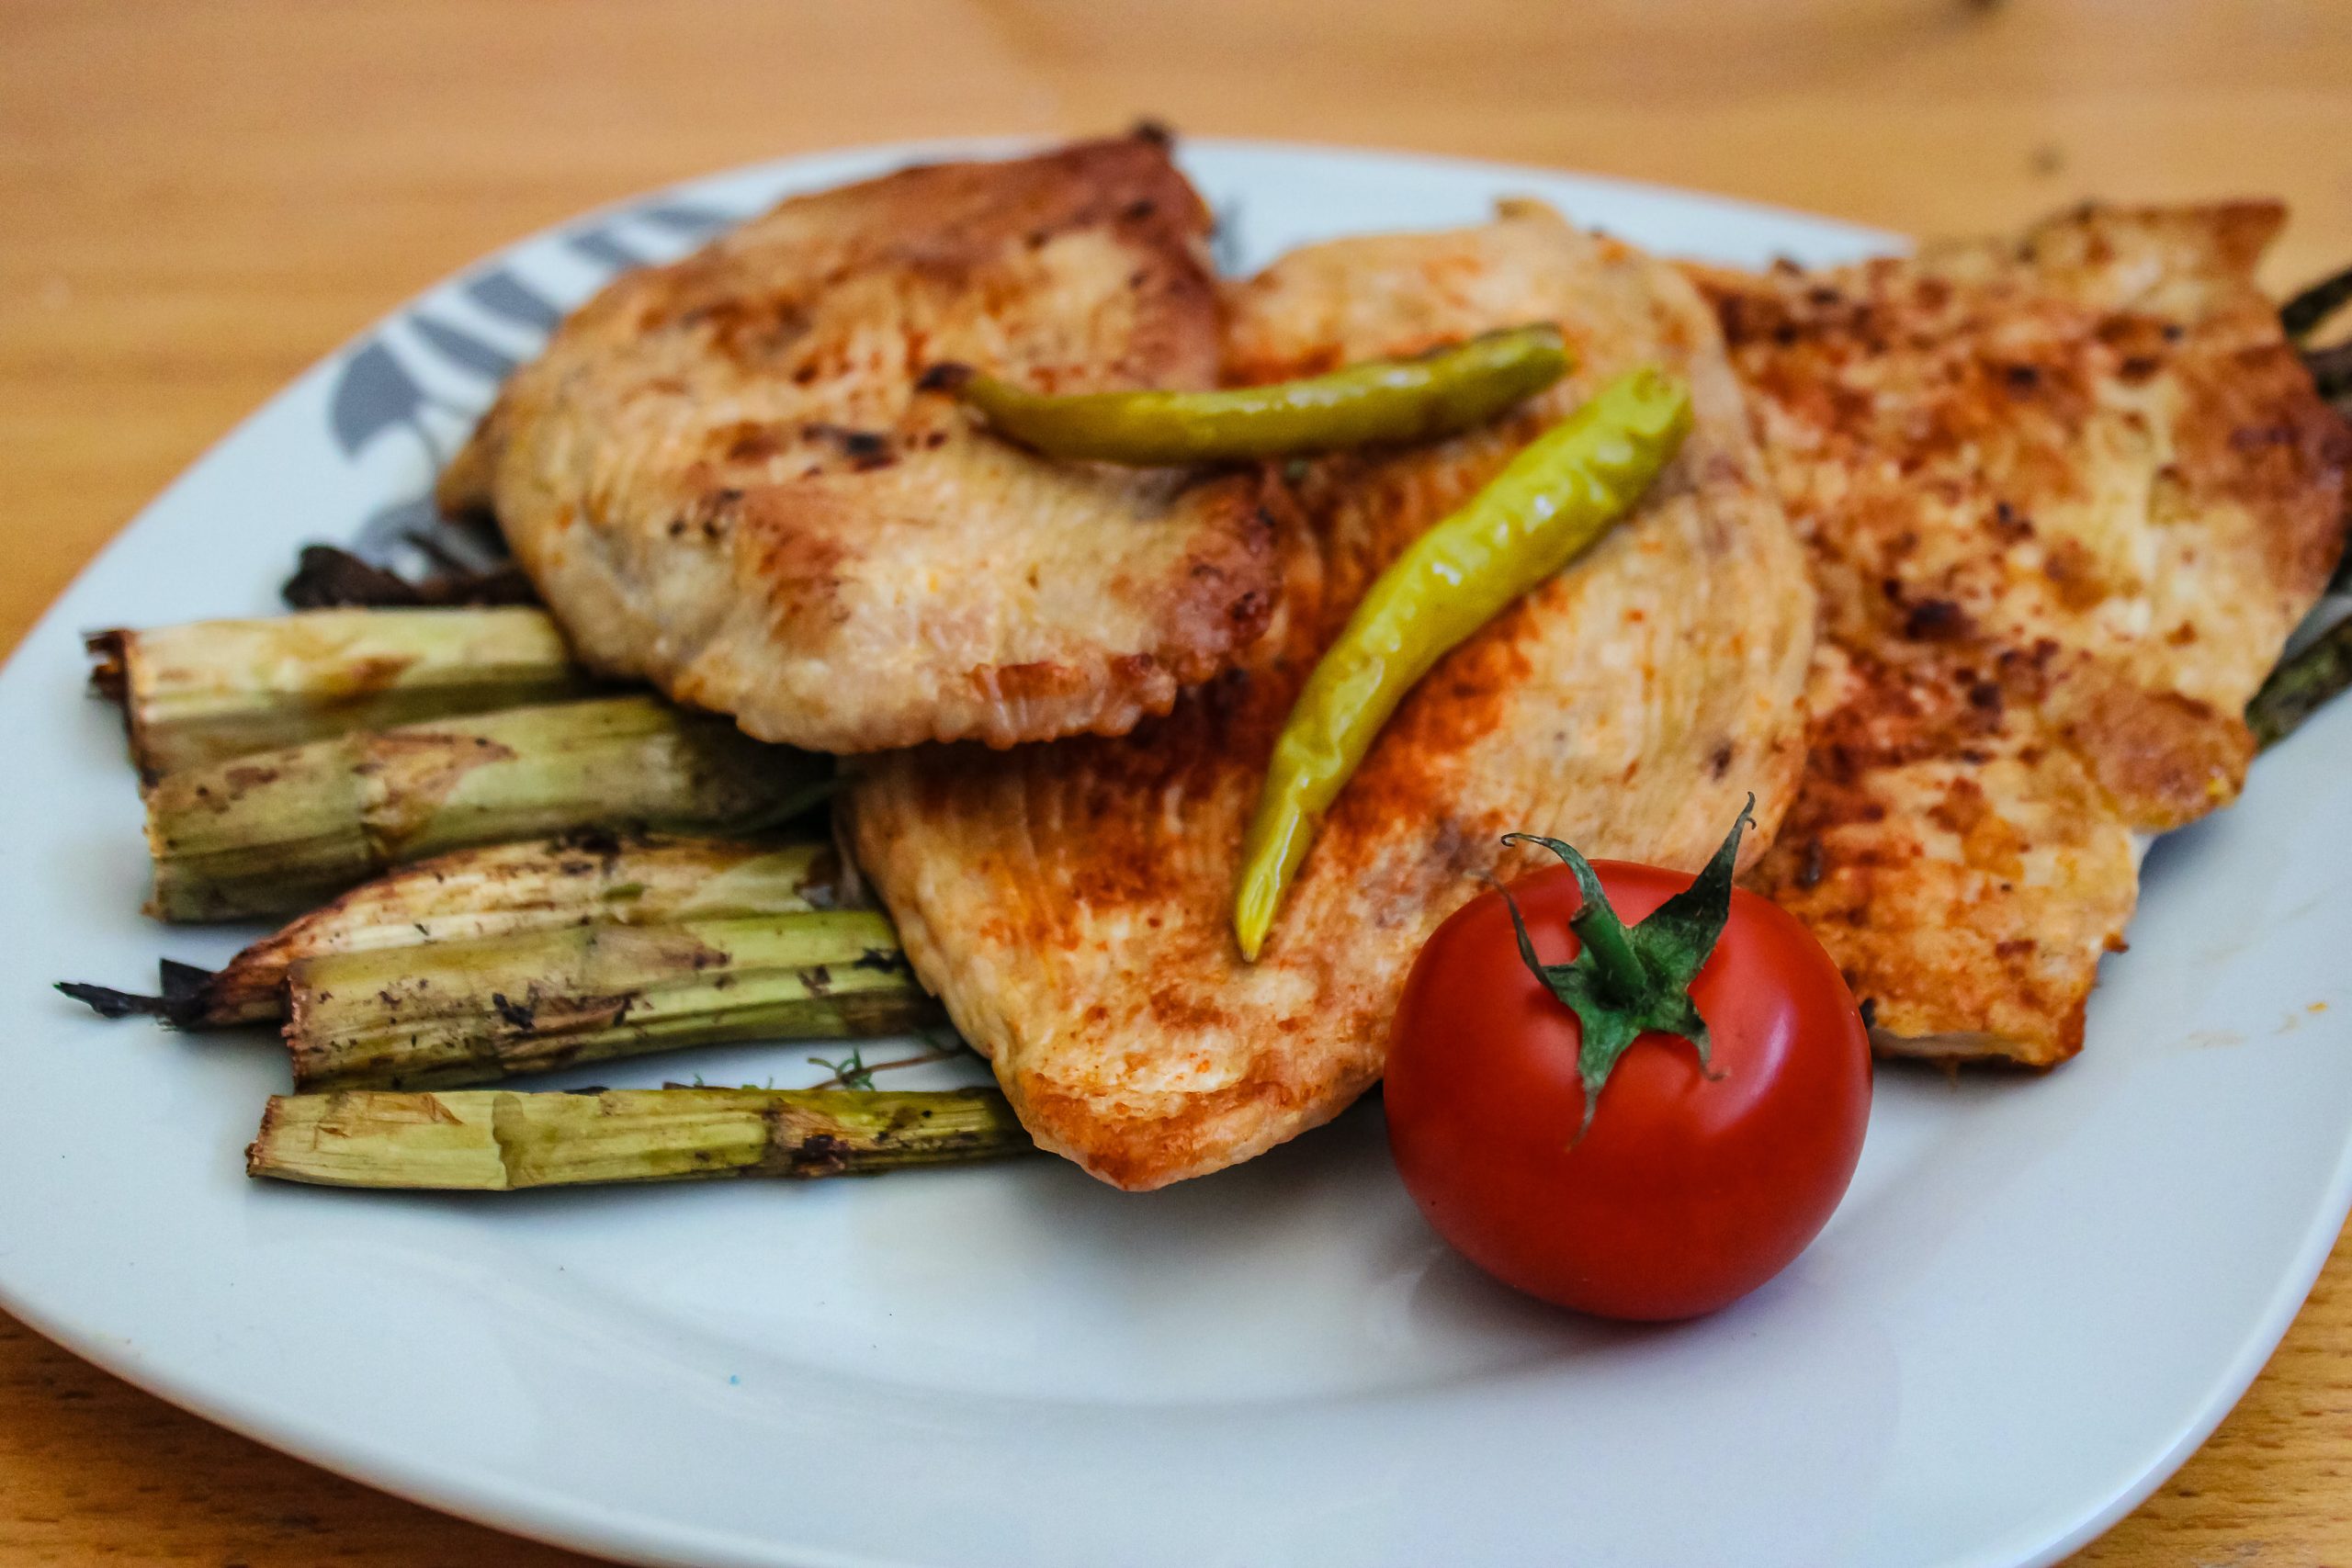 Image Lean Protein Source Chicken Poultry and Roasted Vegetables